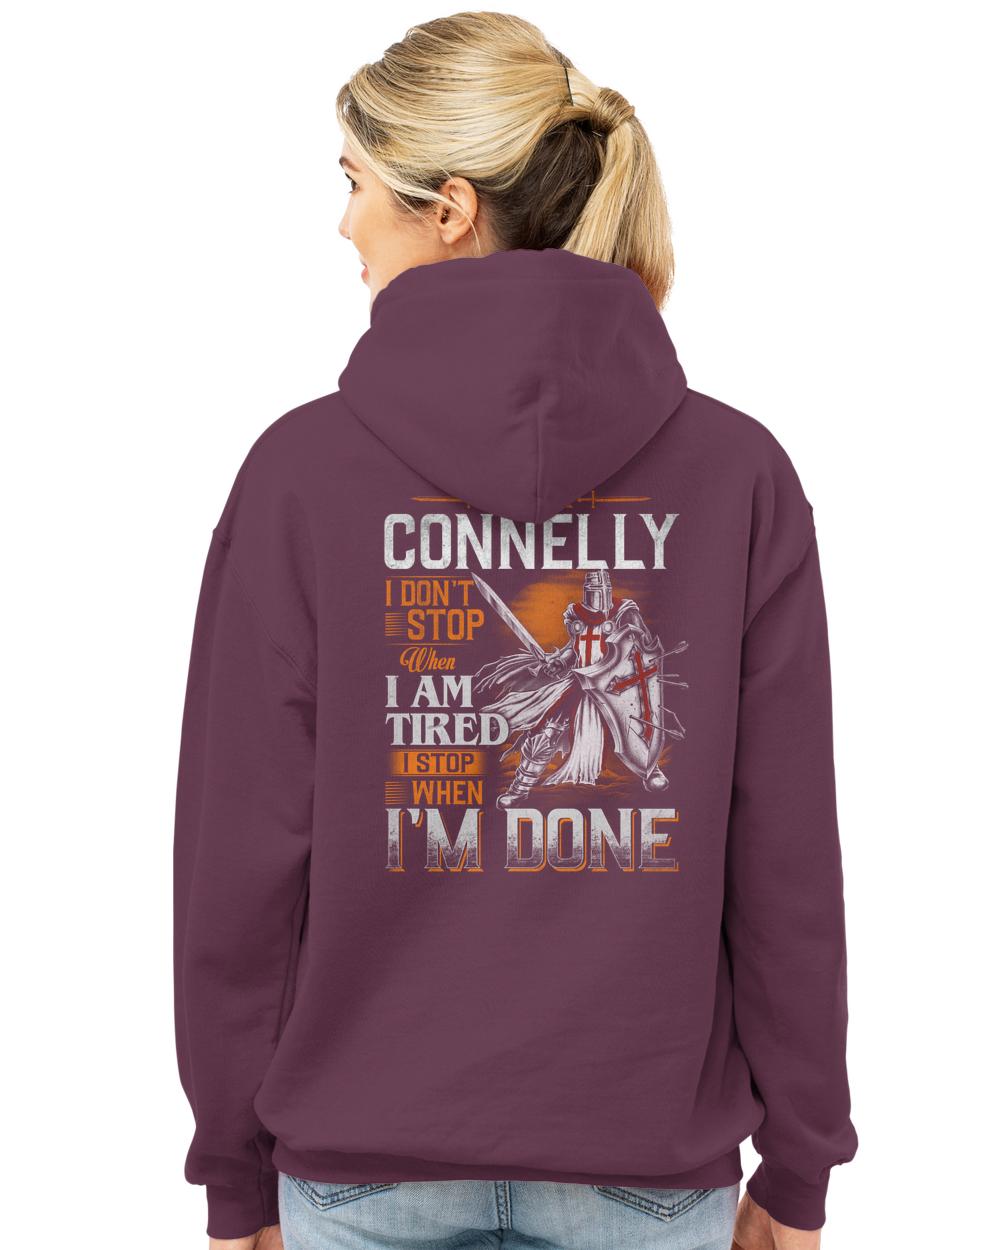 CONNELLY-13K-57-01